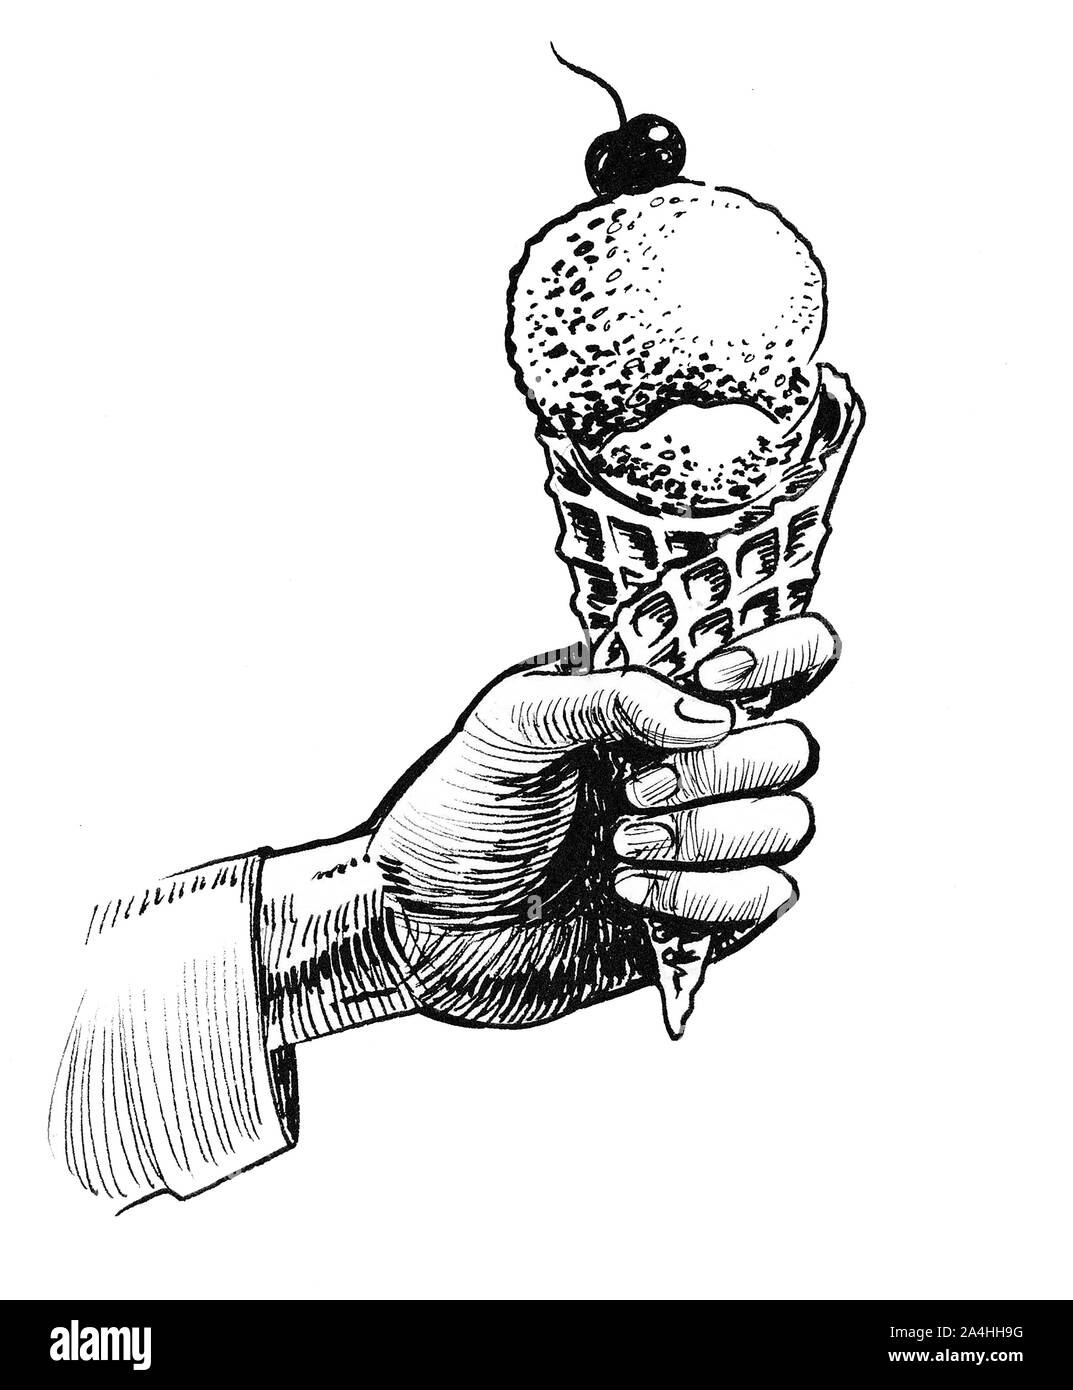 Hand Holding An Ice Cream Cone With A Cherry On Top Ink Black And White Drawing Stock Photo Alamy